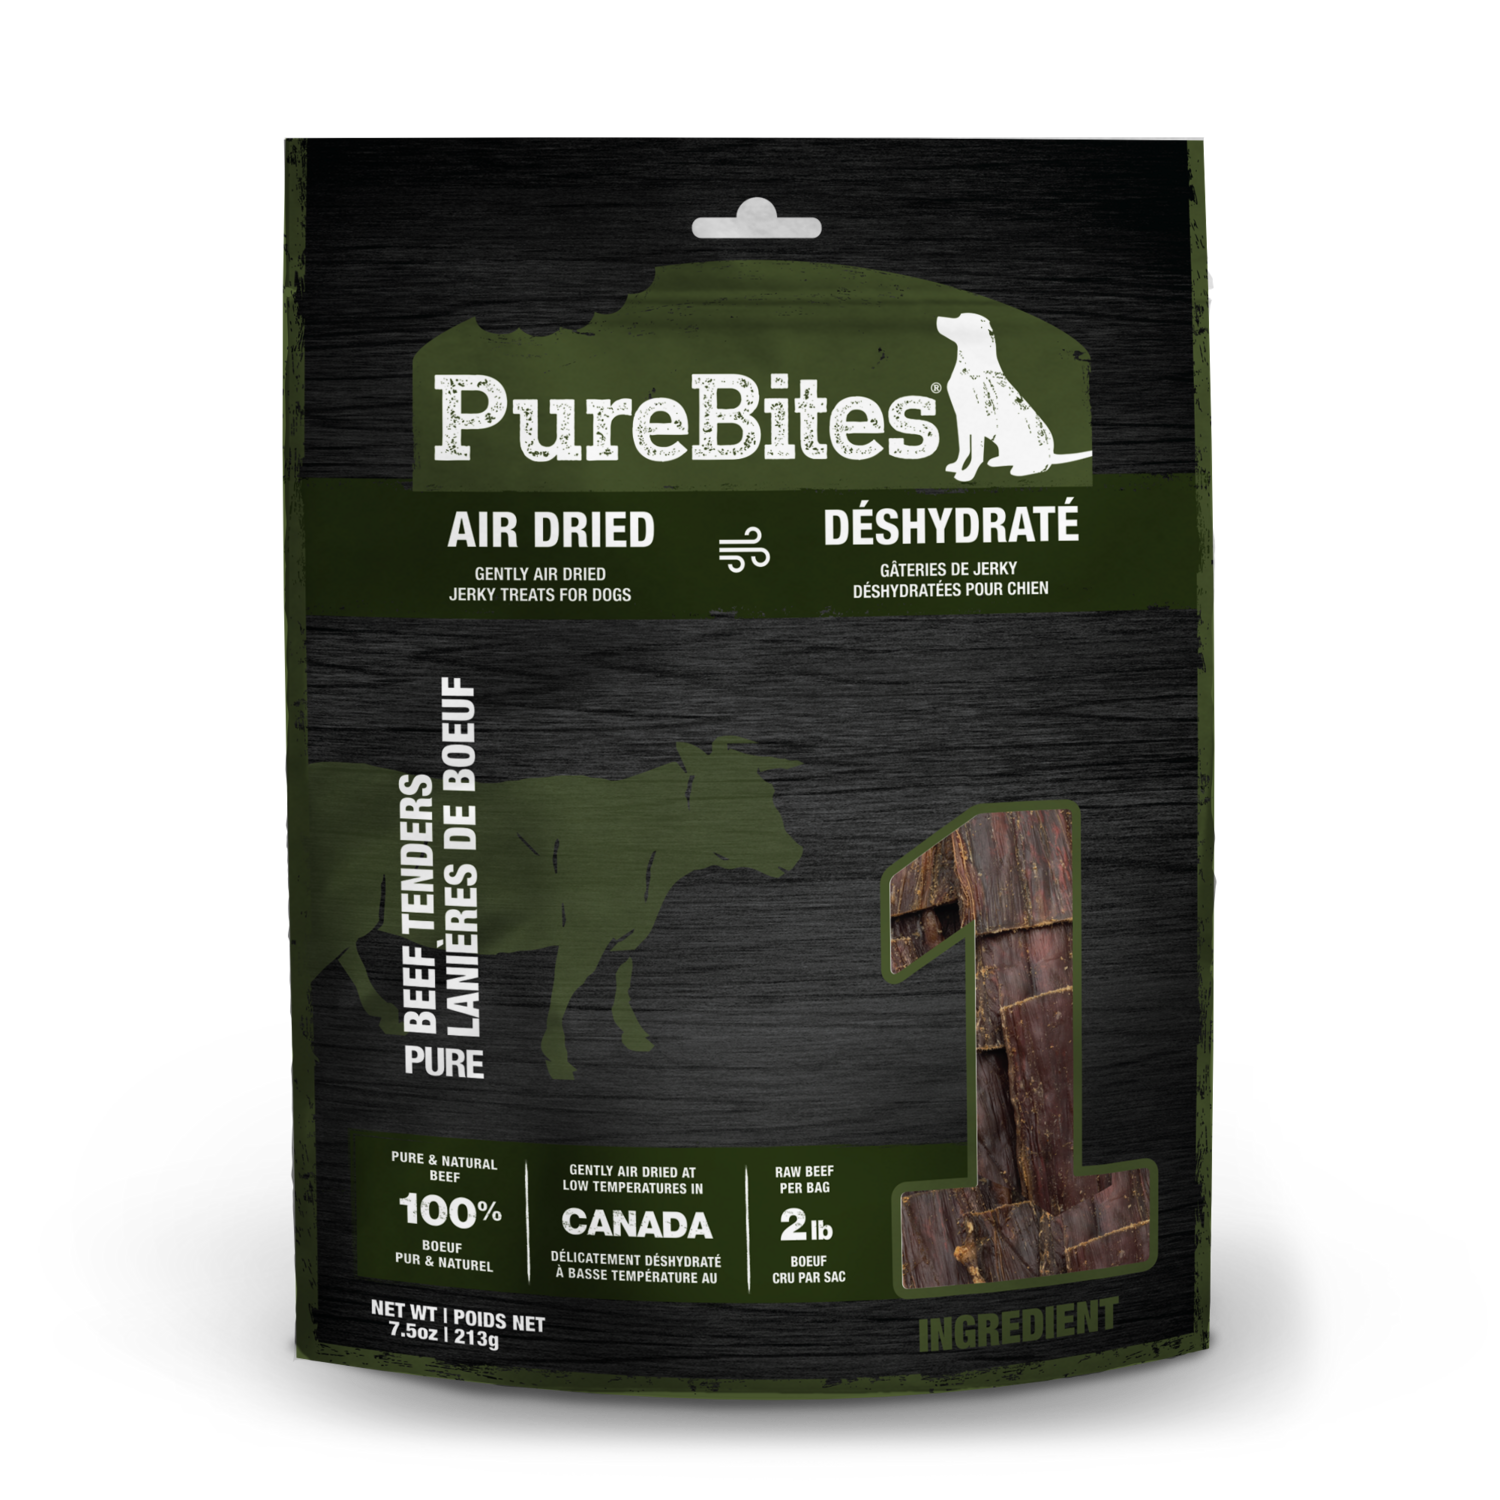 PUREBITES BEEF JERKY FOR DOGS